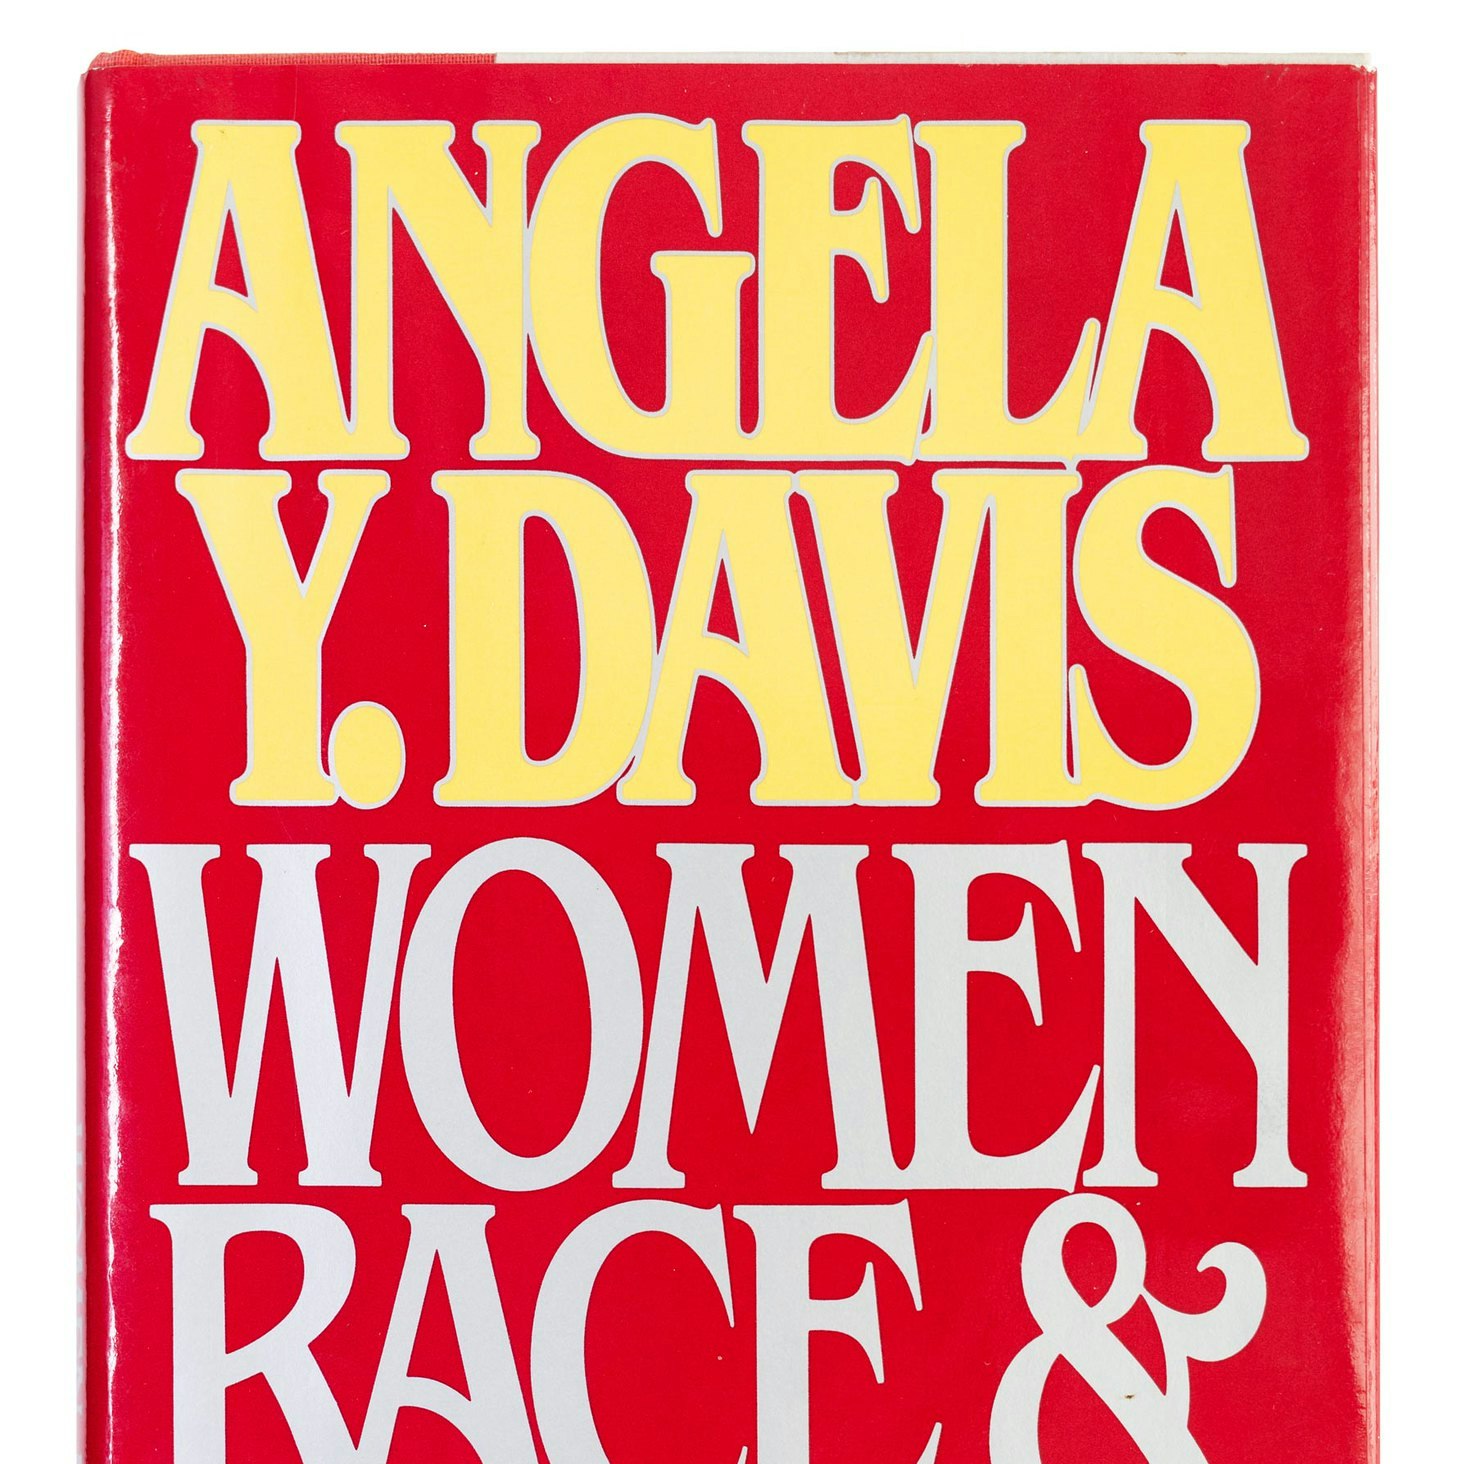 Red book cover with "Angela Y Davis," in yellow text, and "Women Race & Class," in a light grey text.